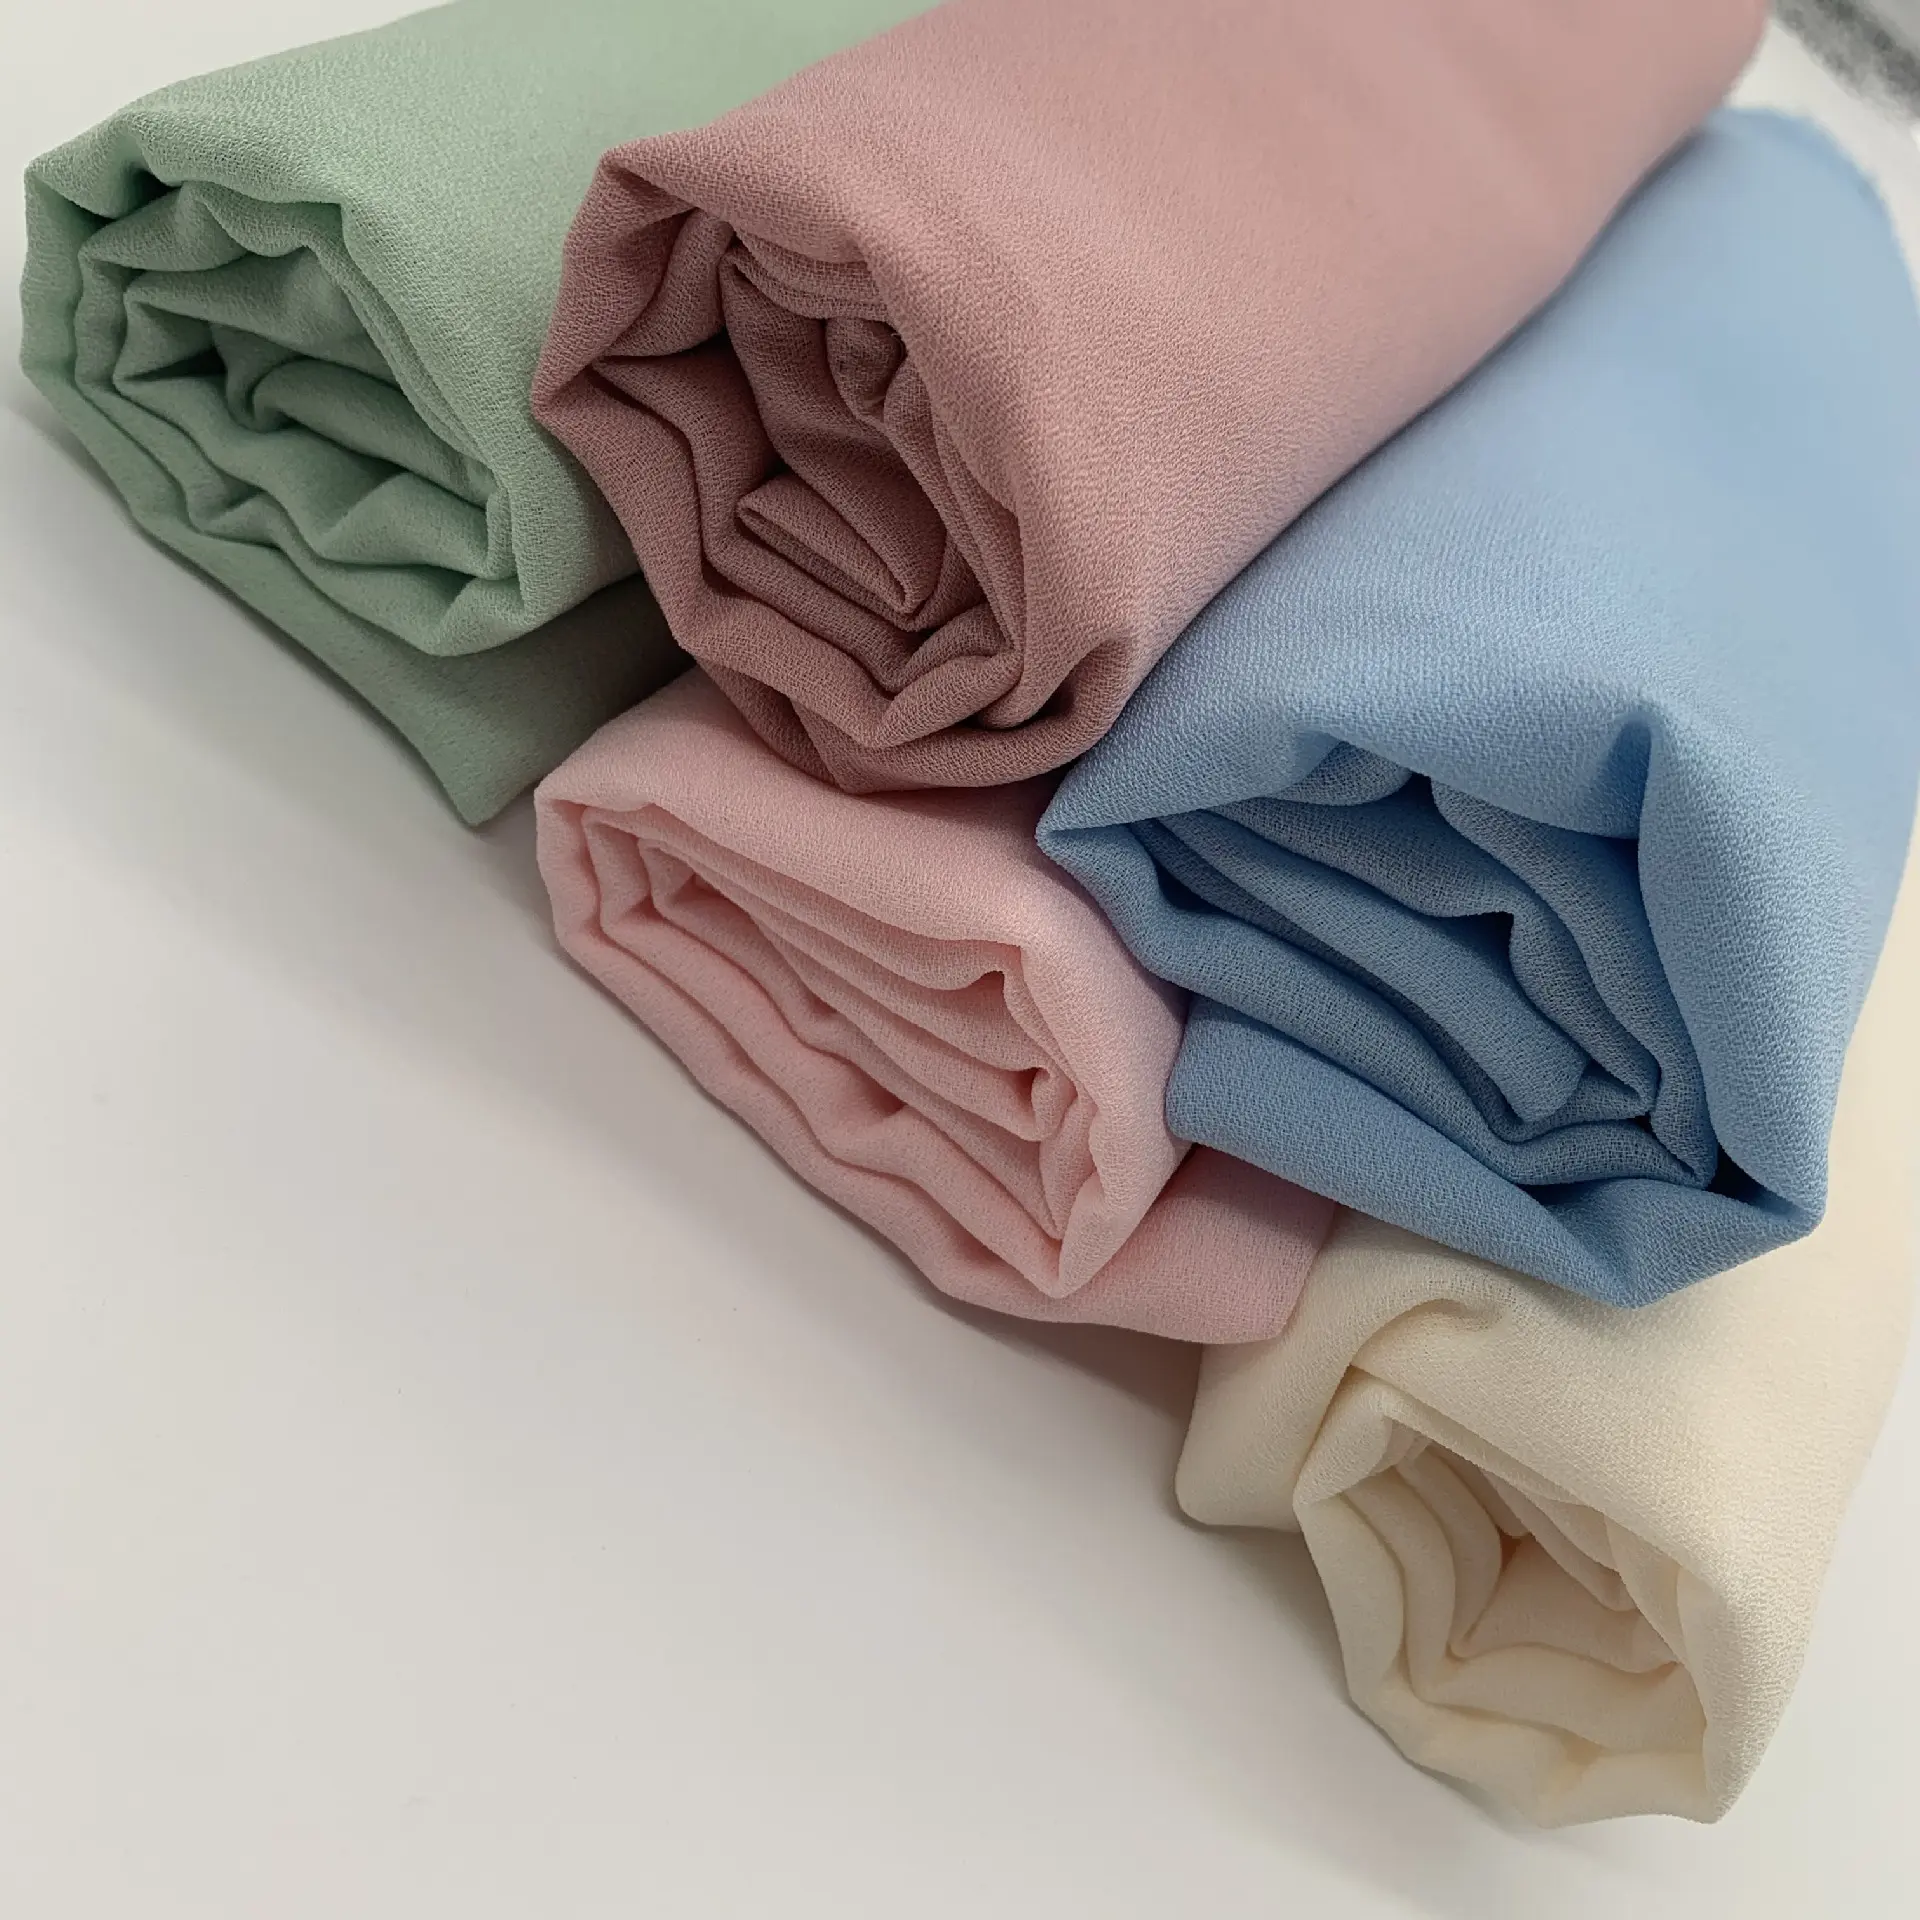 Fabric Manufacturing composition 100% polyester moss crepe de chine fabrics for dresses clothing